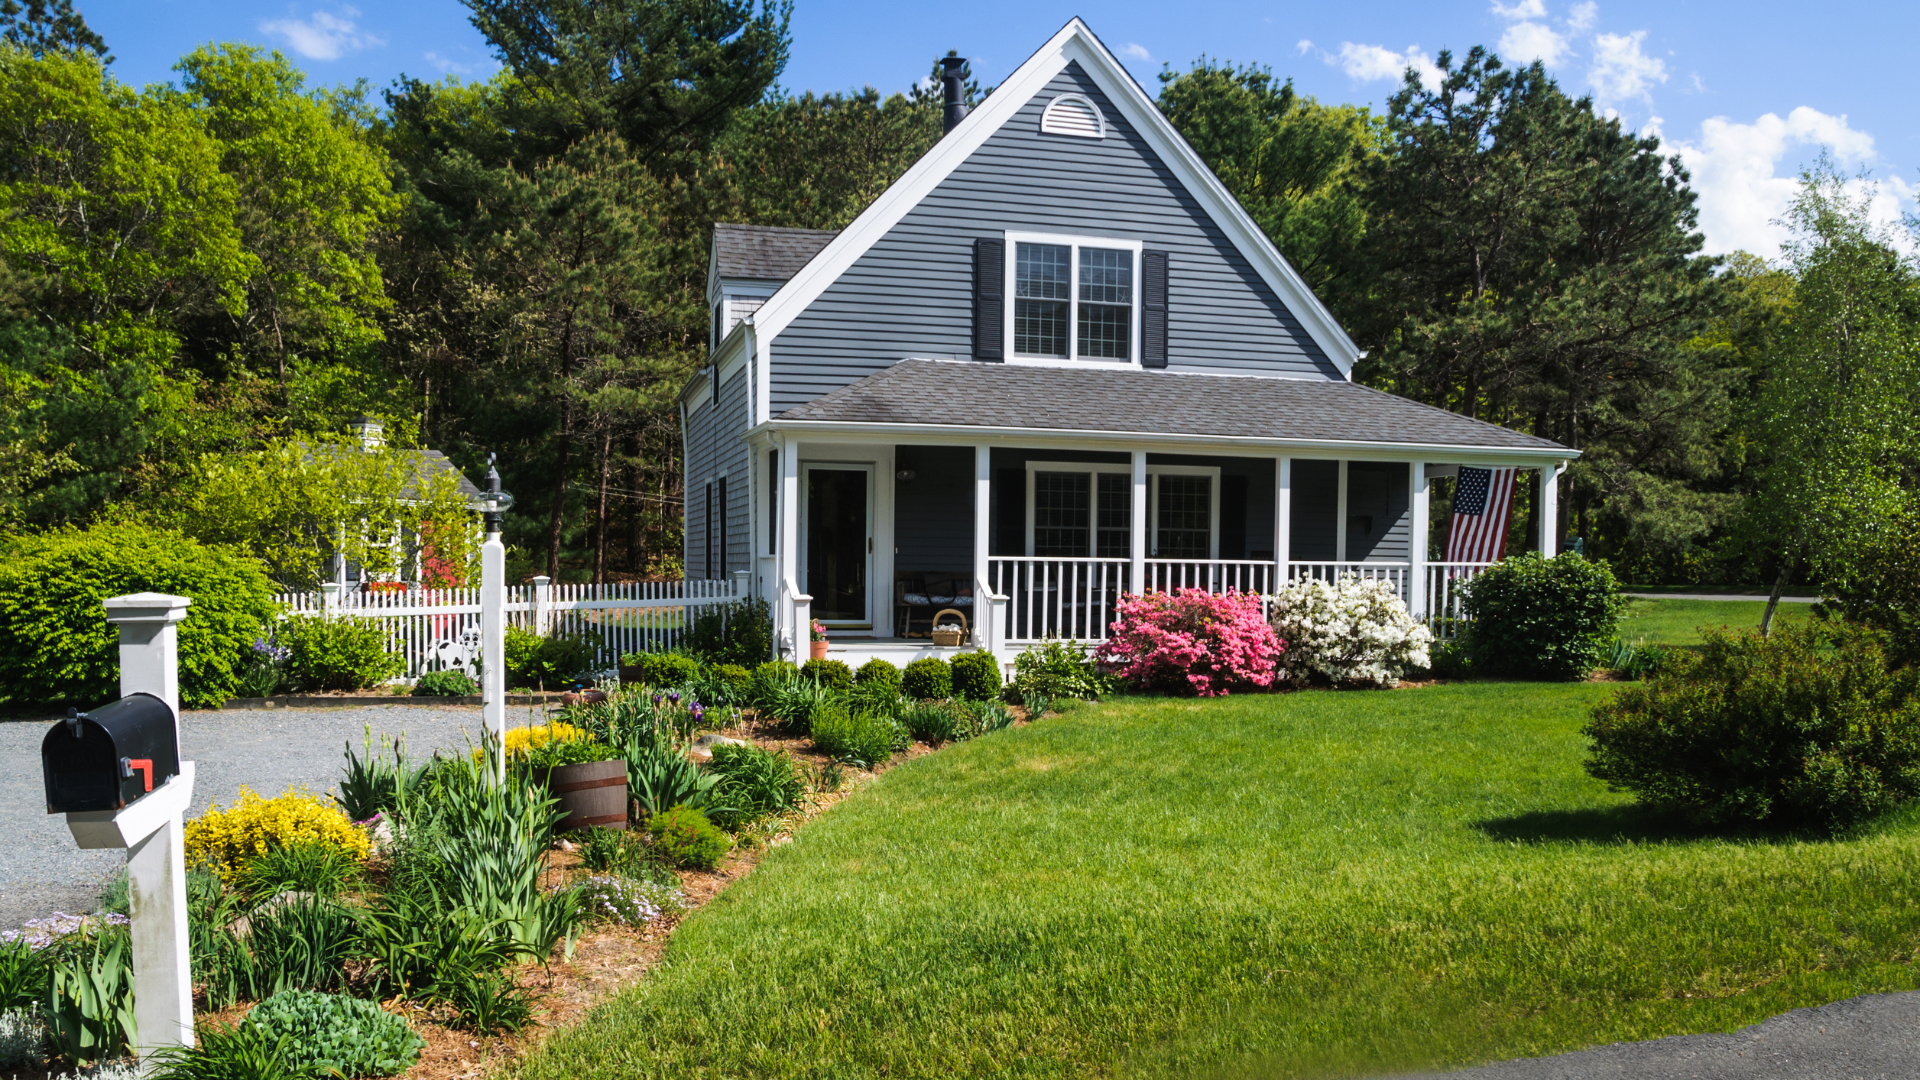 10 Simple Yet Effective Tips to Boost Your Home’s Curb Appeal